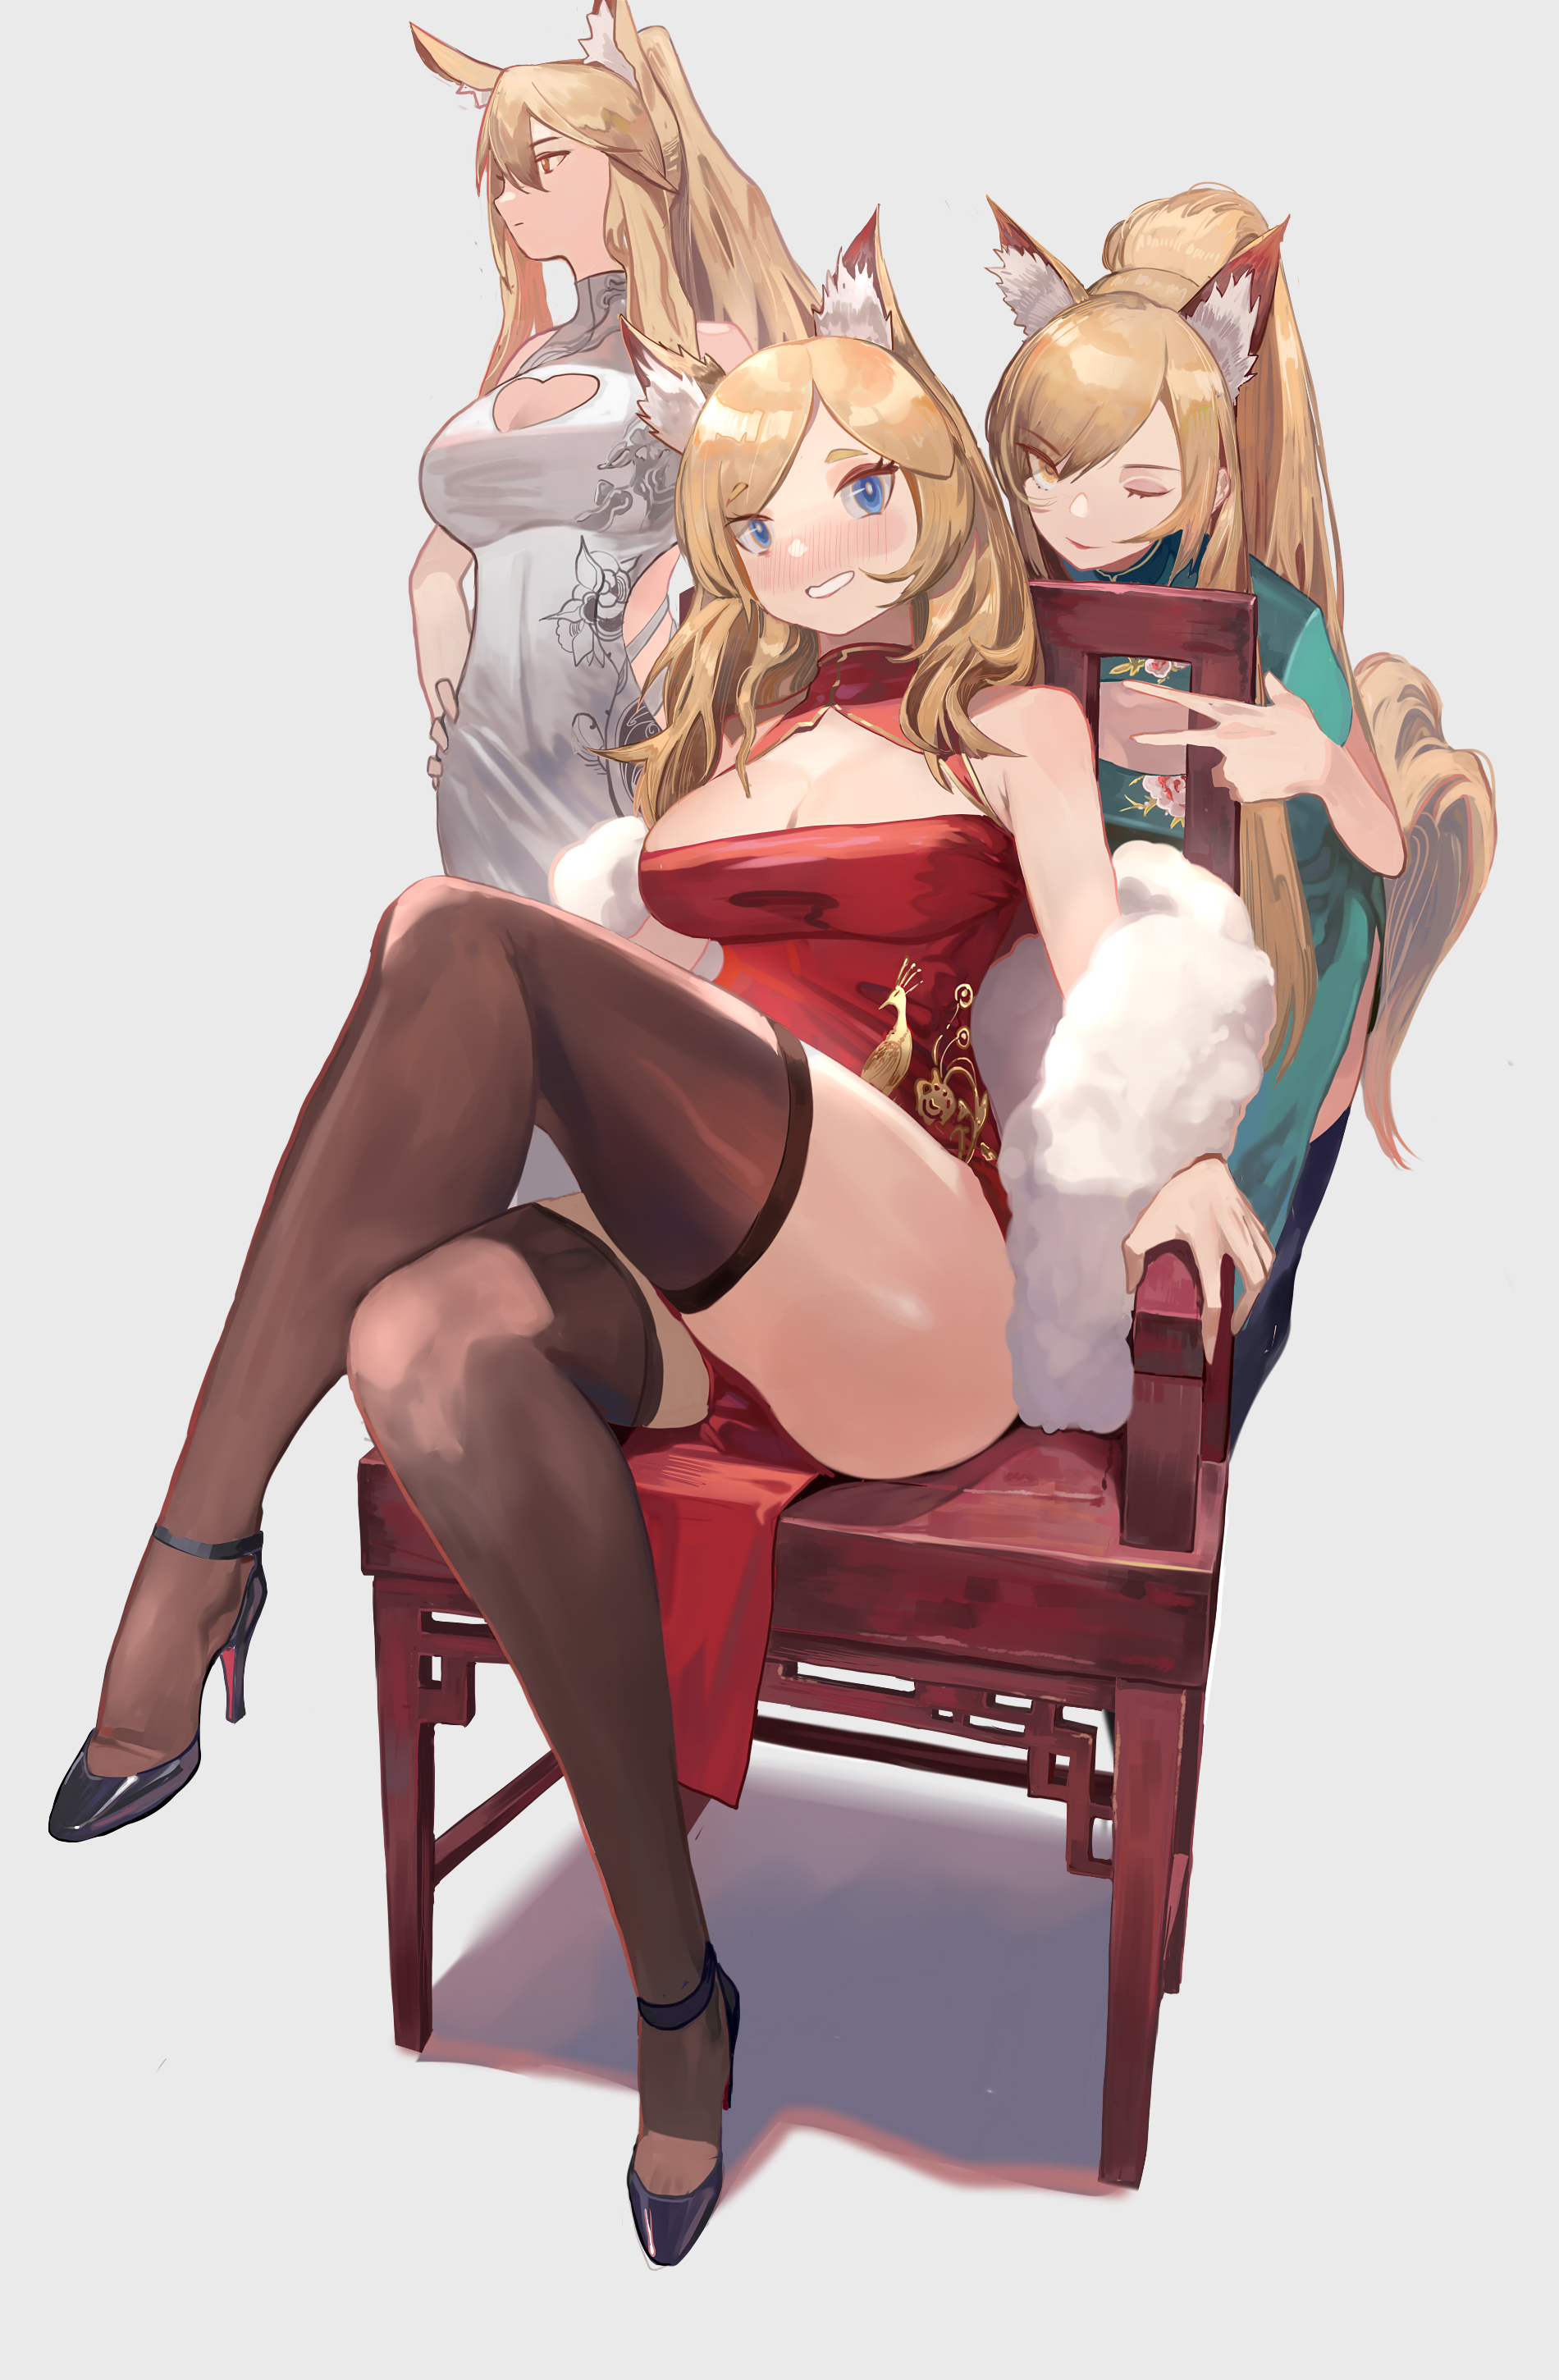 Anime 1900x2900 anime anime girls simple background Arknights blonde animal ears Vic portrait display stockings cleavage black stockings chinese dress thigh-highs Blemishine (Arknights) Whislash (Arknights) Nearl(Arknights) thick thigh